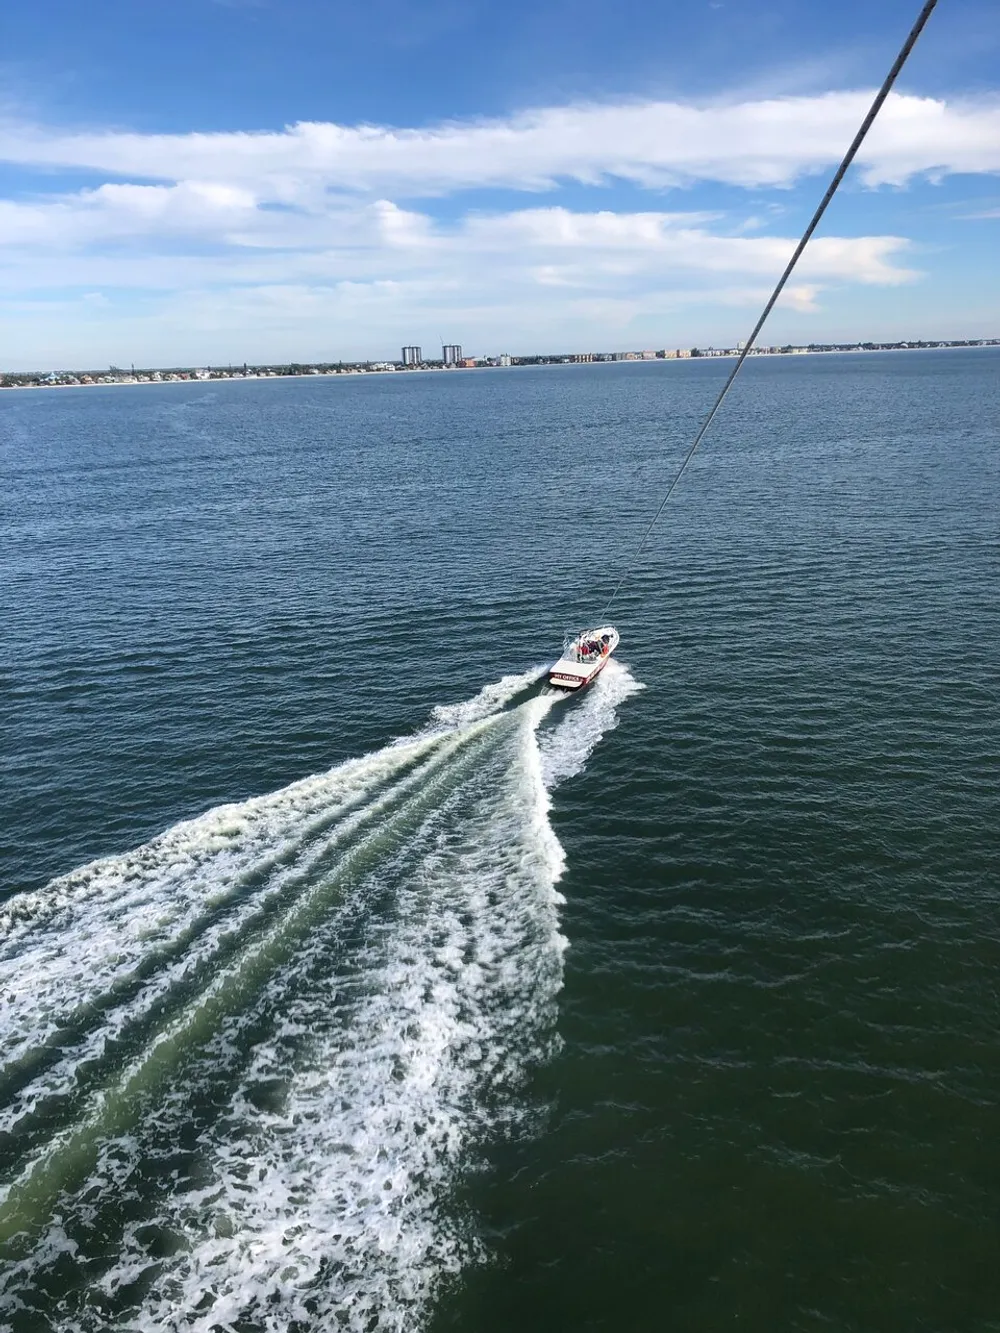 A boat is cruising through the water leaving a foamy wake with a coastline and buildings in the background and a rope diagonally entering the frame from the top